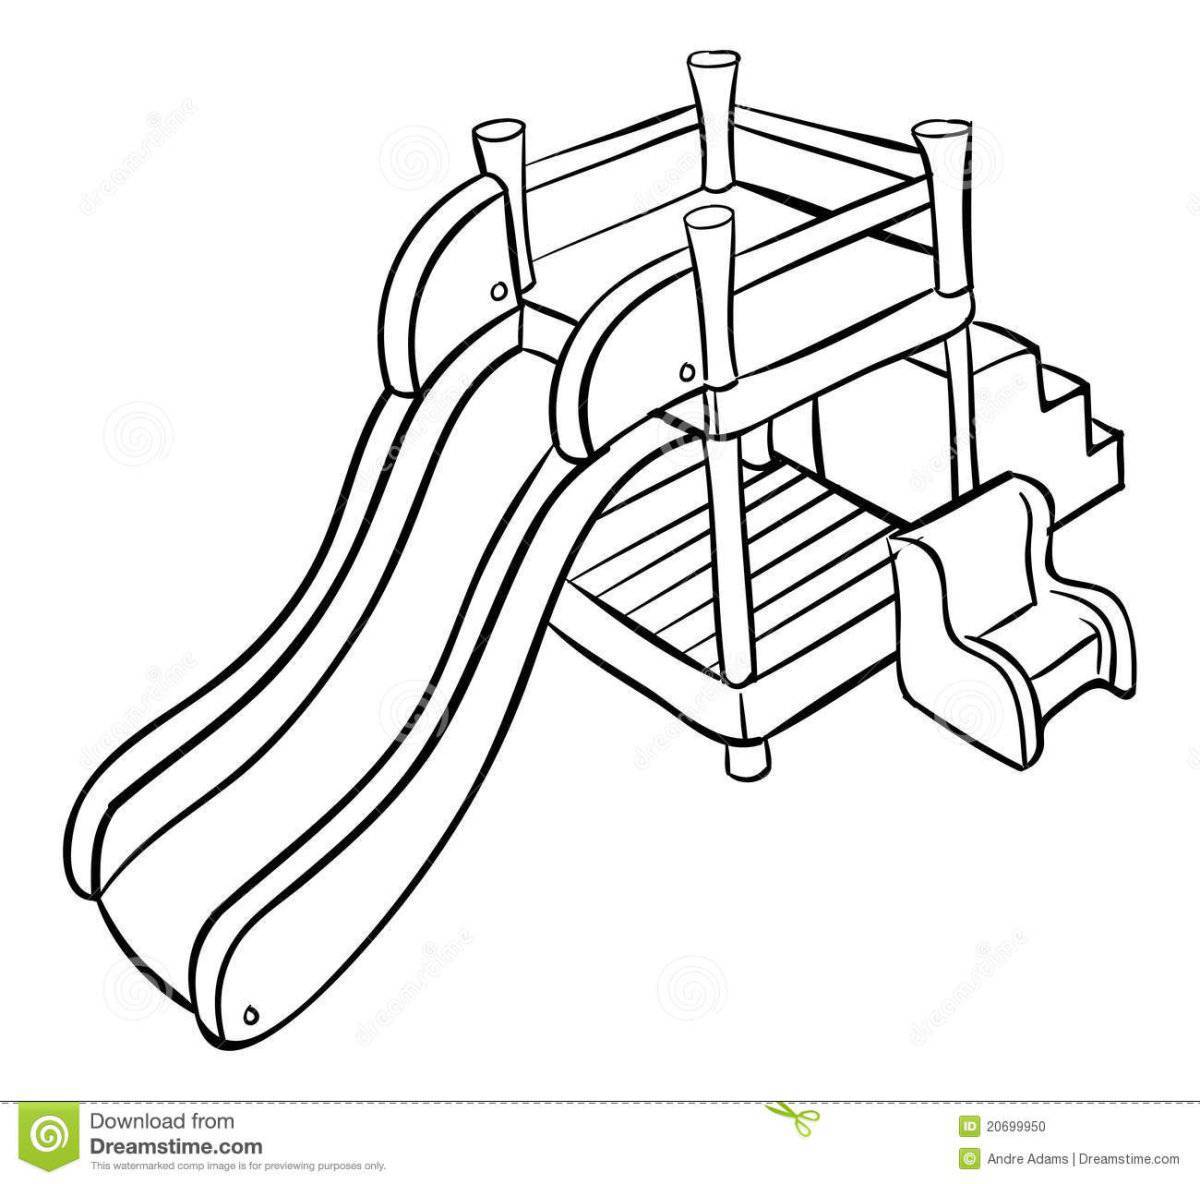 Coloring page happy slide eater